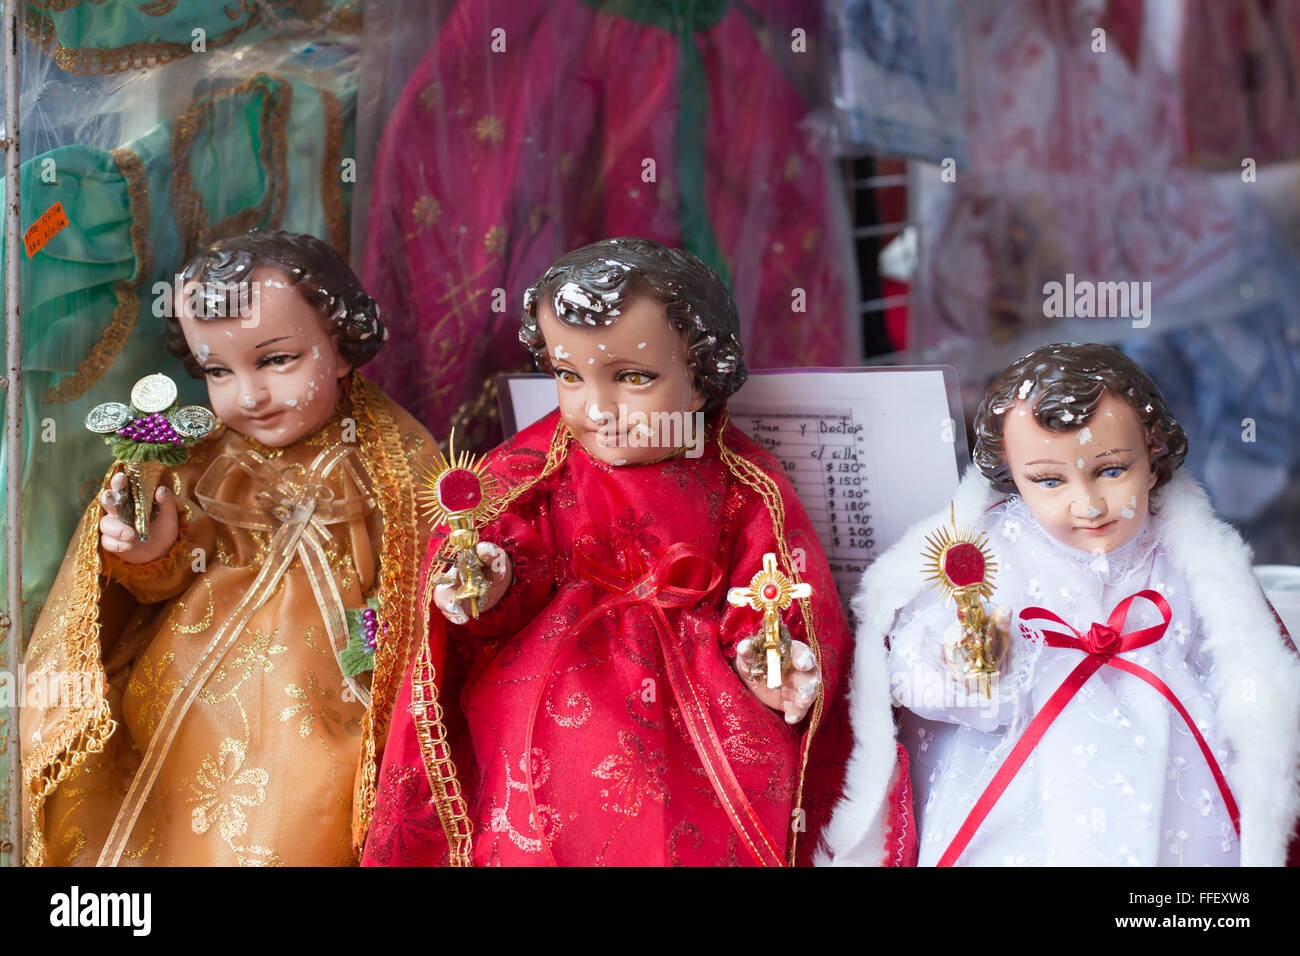 Oaxaca, Mexico - Baby Jesus dolls on sale before the February 2 Feast of Candelaria. Stock Photo